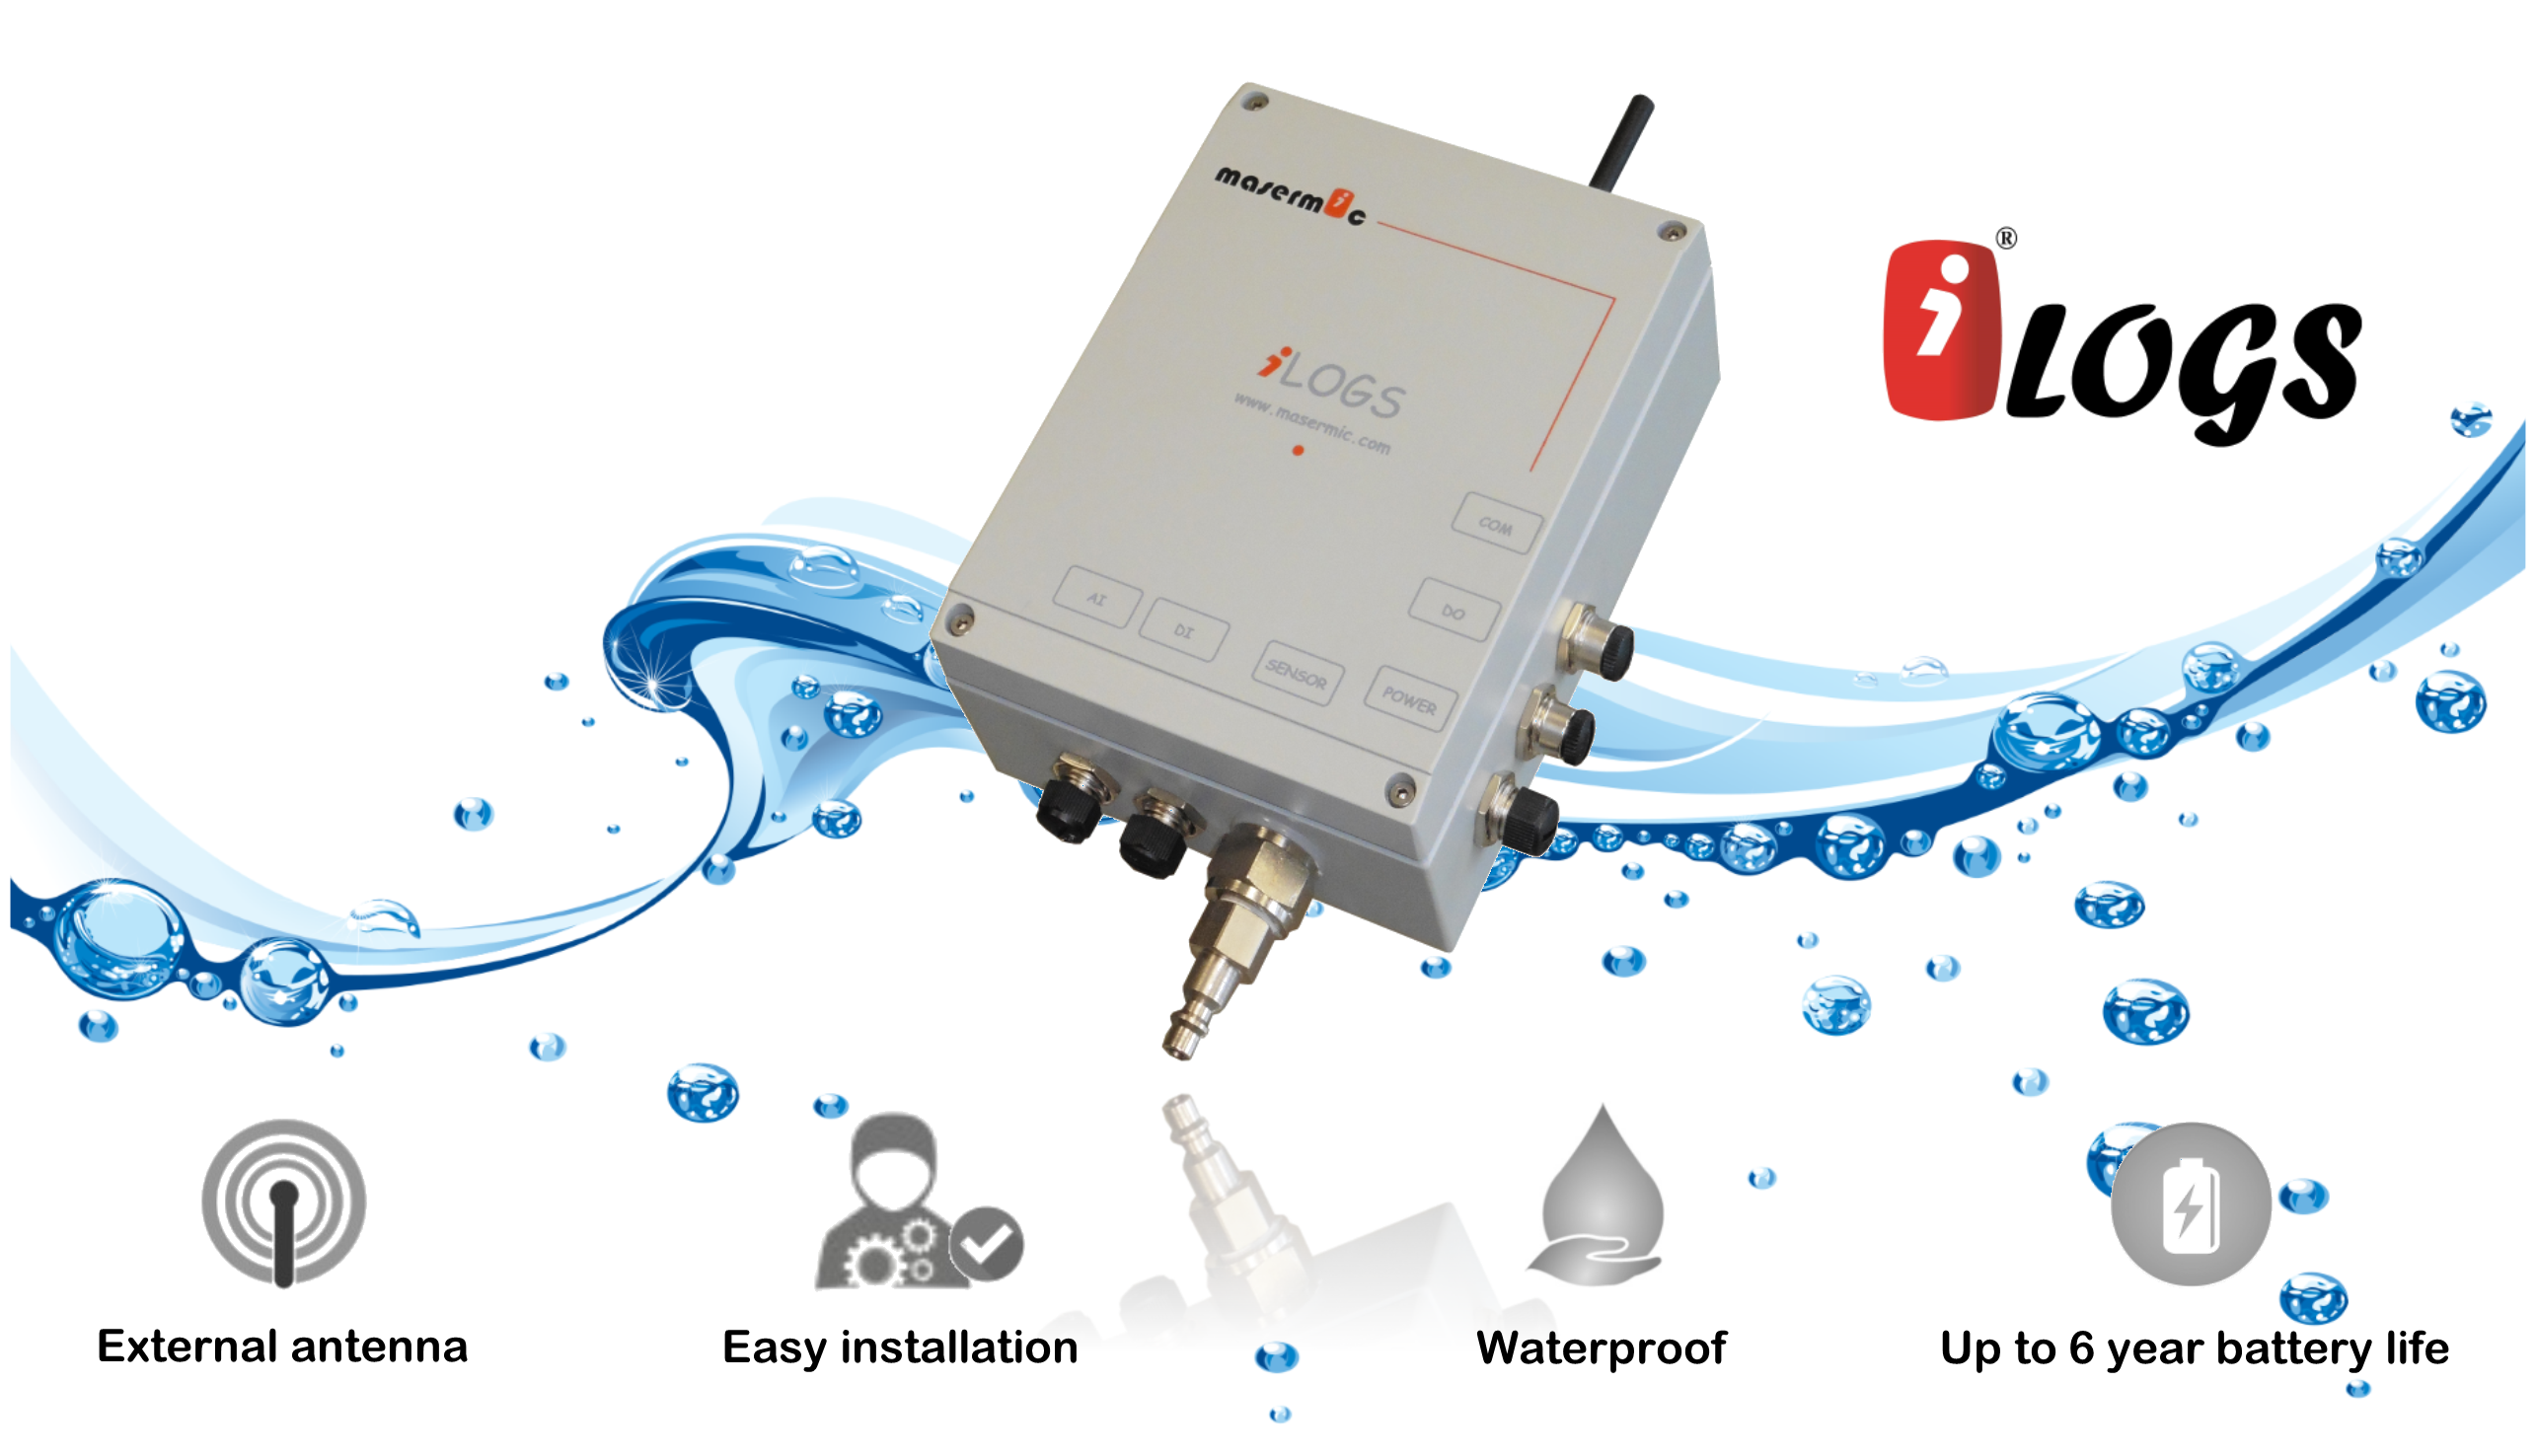 3G dataloggers for the remote monitoring of water facilities